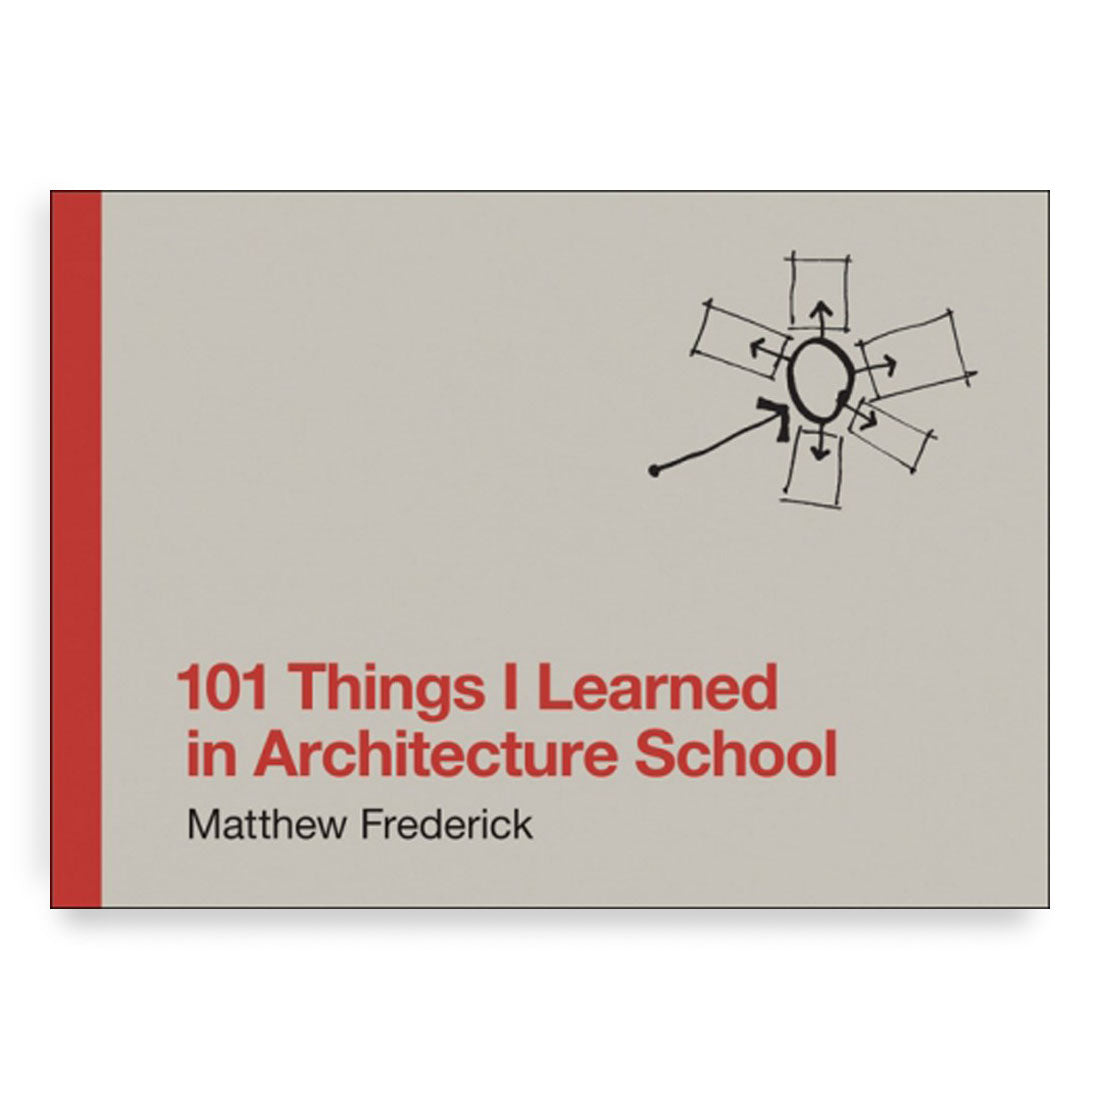 The front cover of 101 Things I Learned in Architecture School.